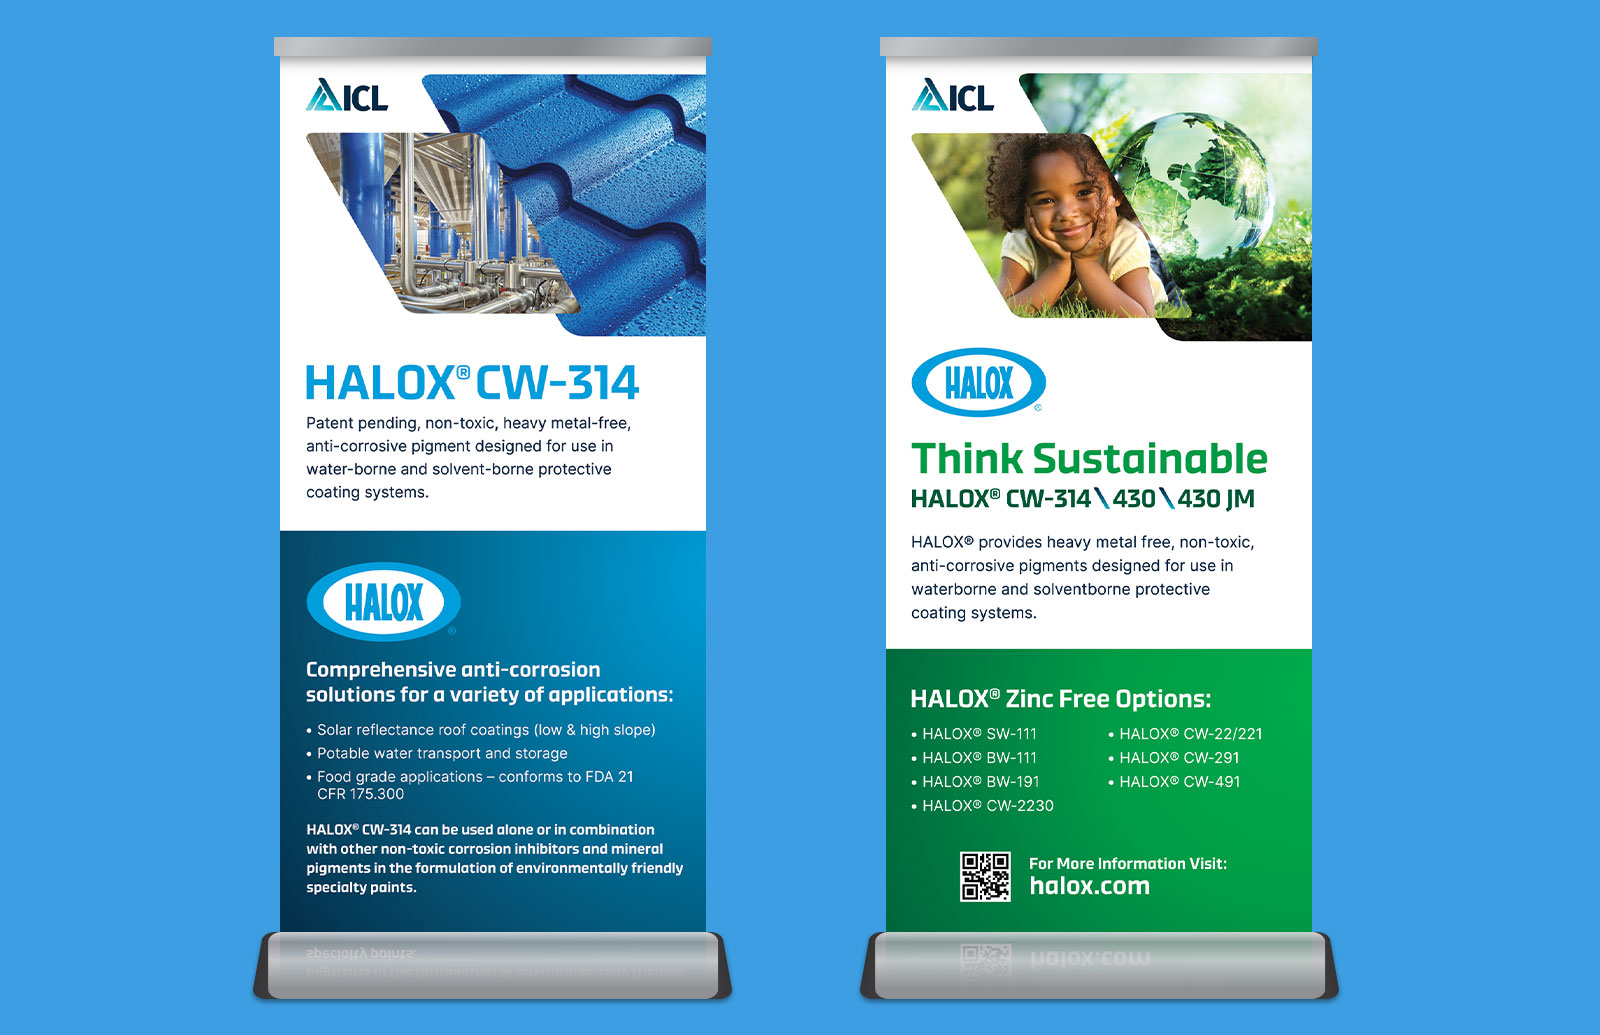 Pop-up banners highlighting key HALOX® product offerings for use in trade shows